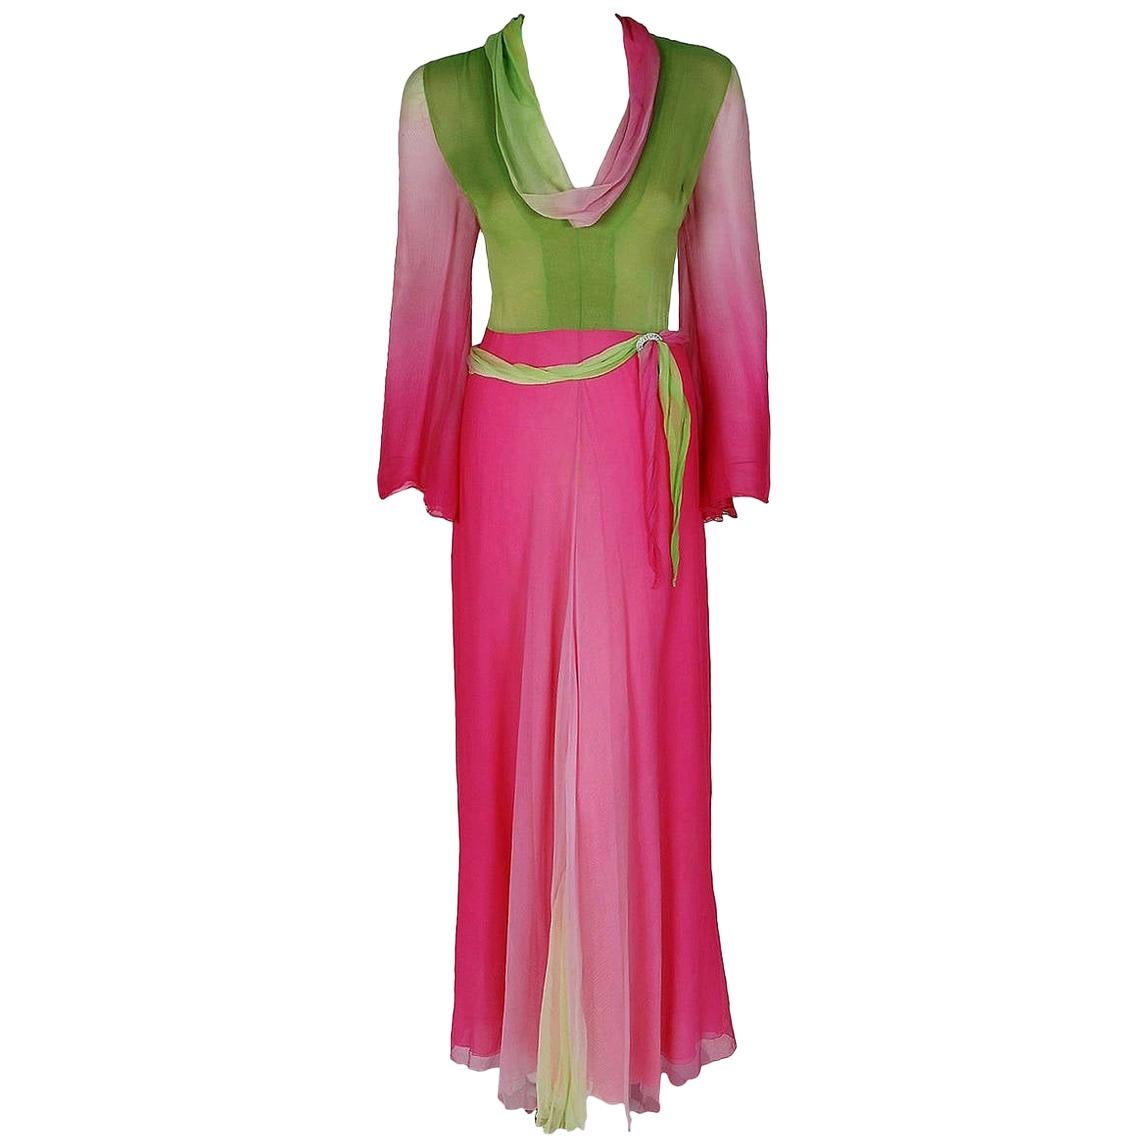 Vintage 1970's Pauline Trigere Pink & Green Ombre Silk Chiffon Bell-Sleeve Gown